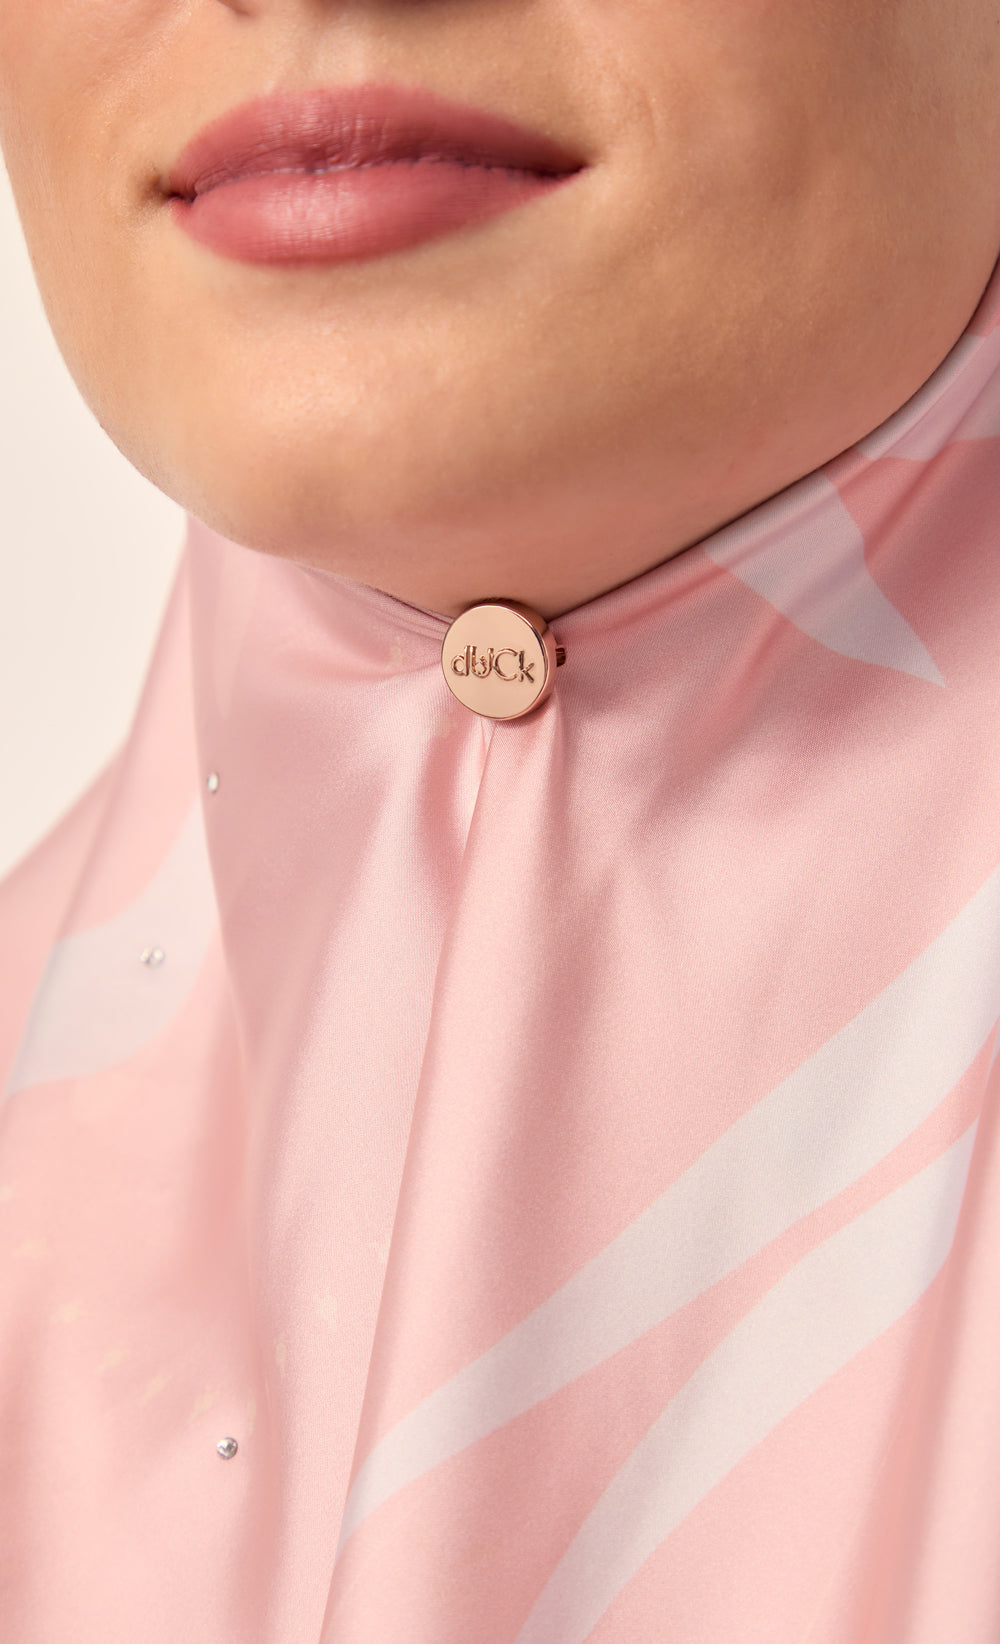 Trio dUCk Pin Set 2.0 in Rose Gold